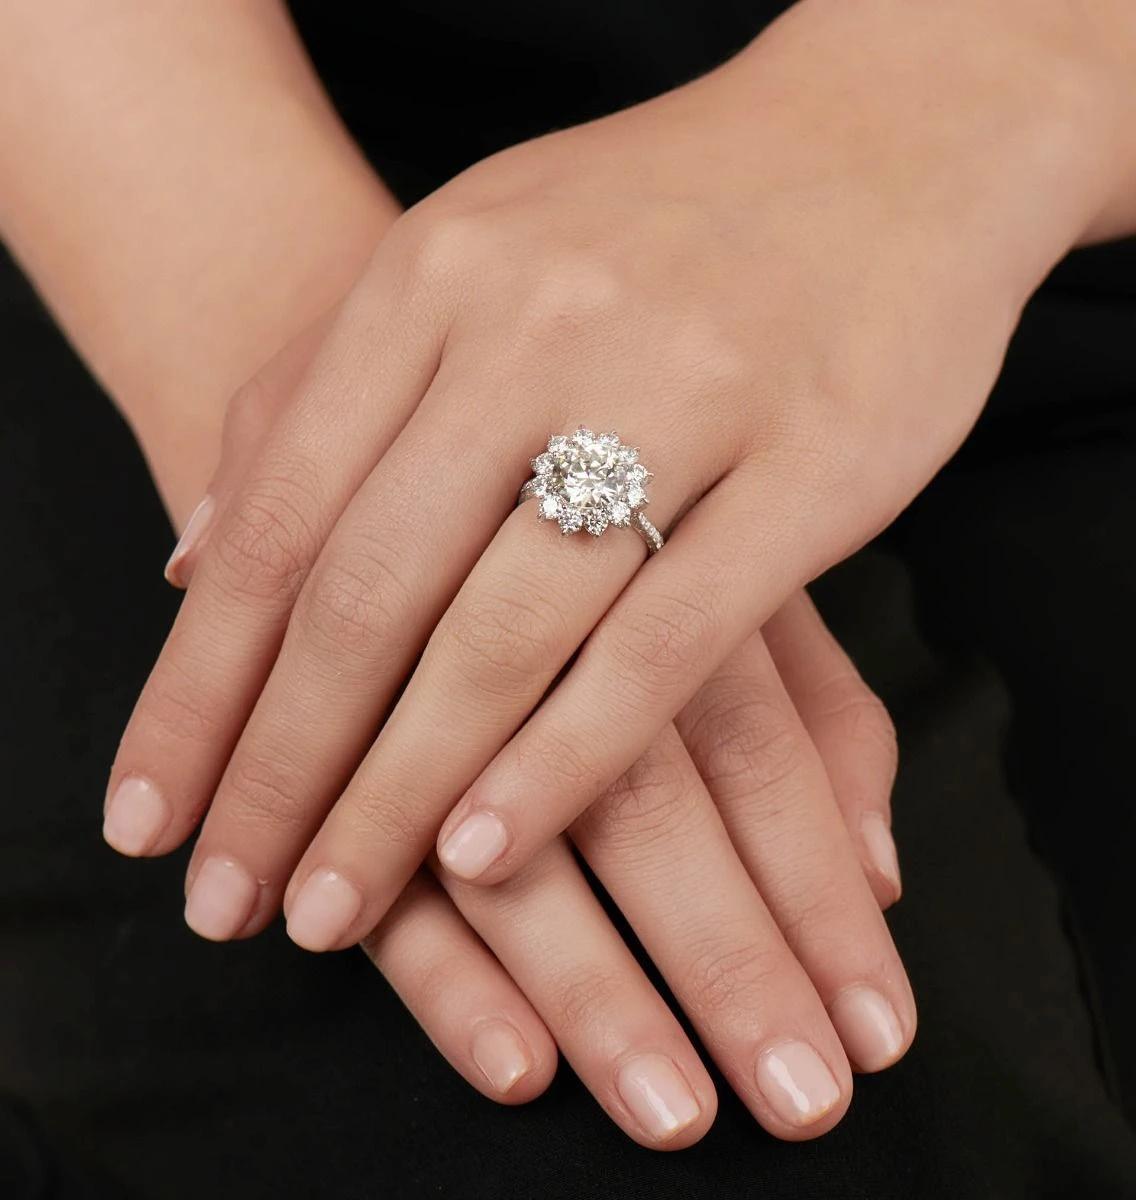 Featuring a prominent diamond sunflower arrangement, this hand made platinum ring centers upon one round brilliant-cut diamond weighing 3.01cts., set within a frame of 12 round-cut diamonds weighing 2.52 cts. Each prong evokes the appearance of a